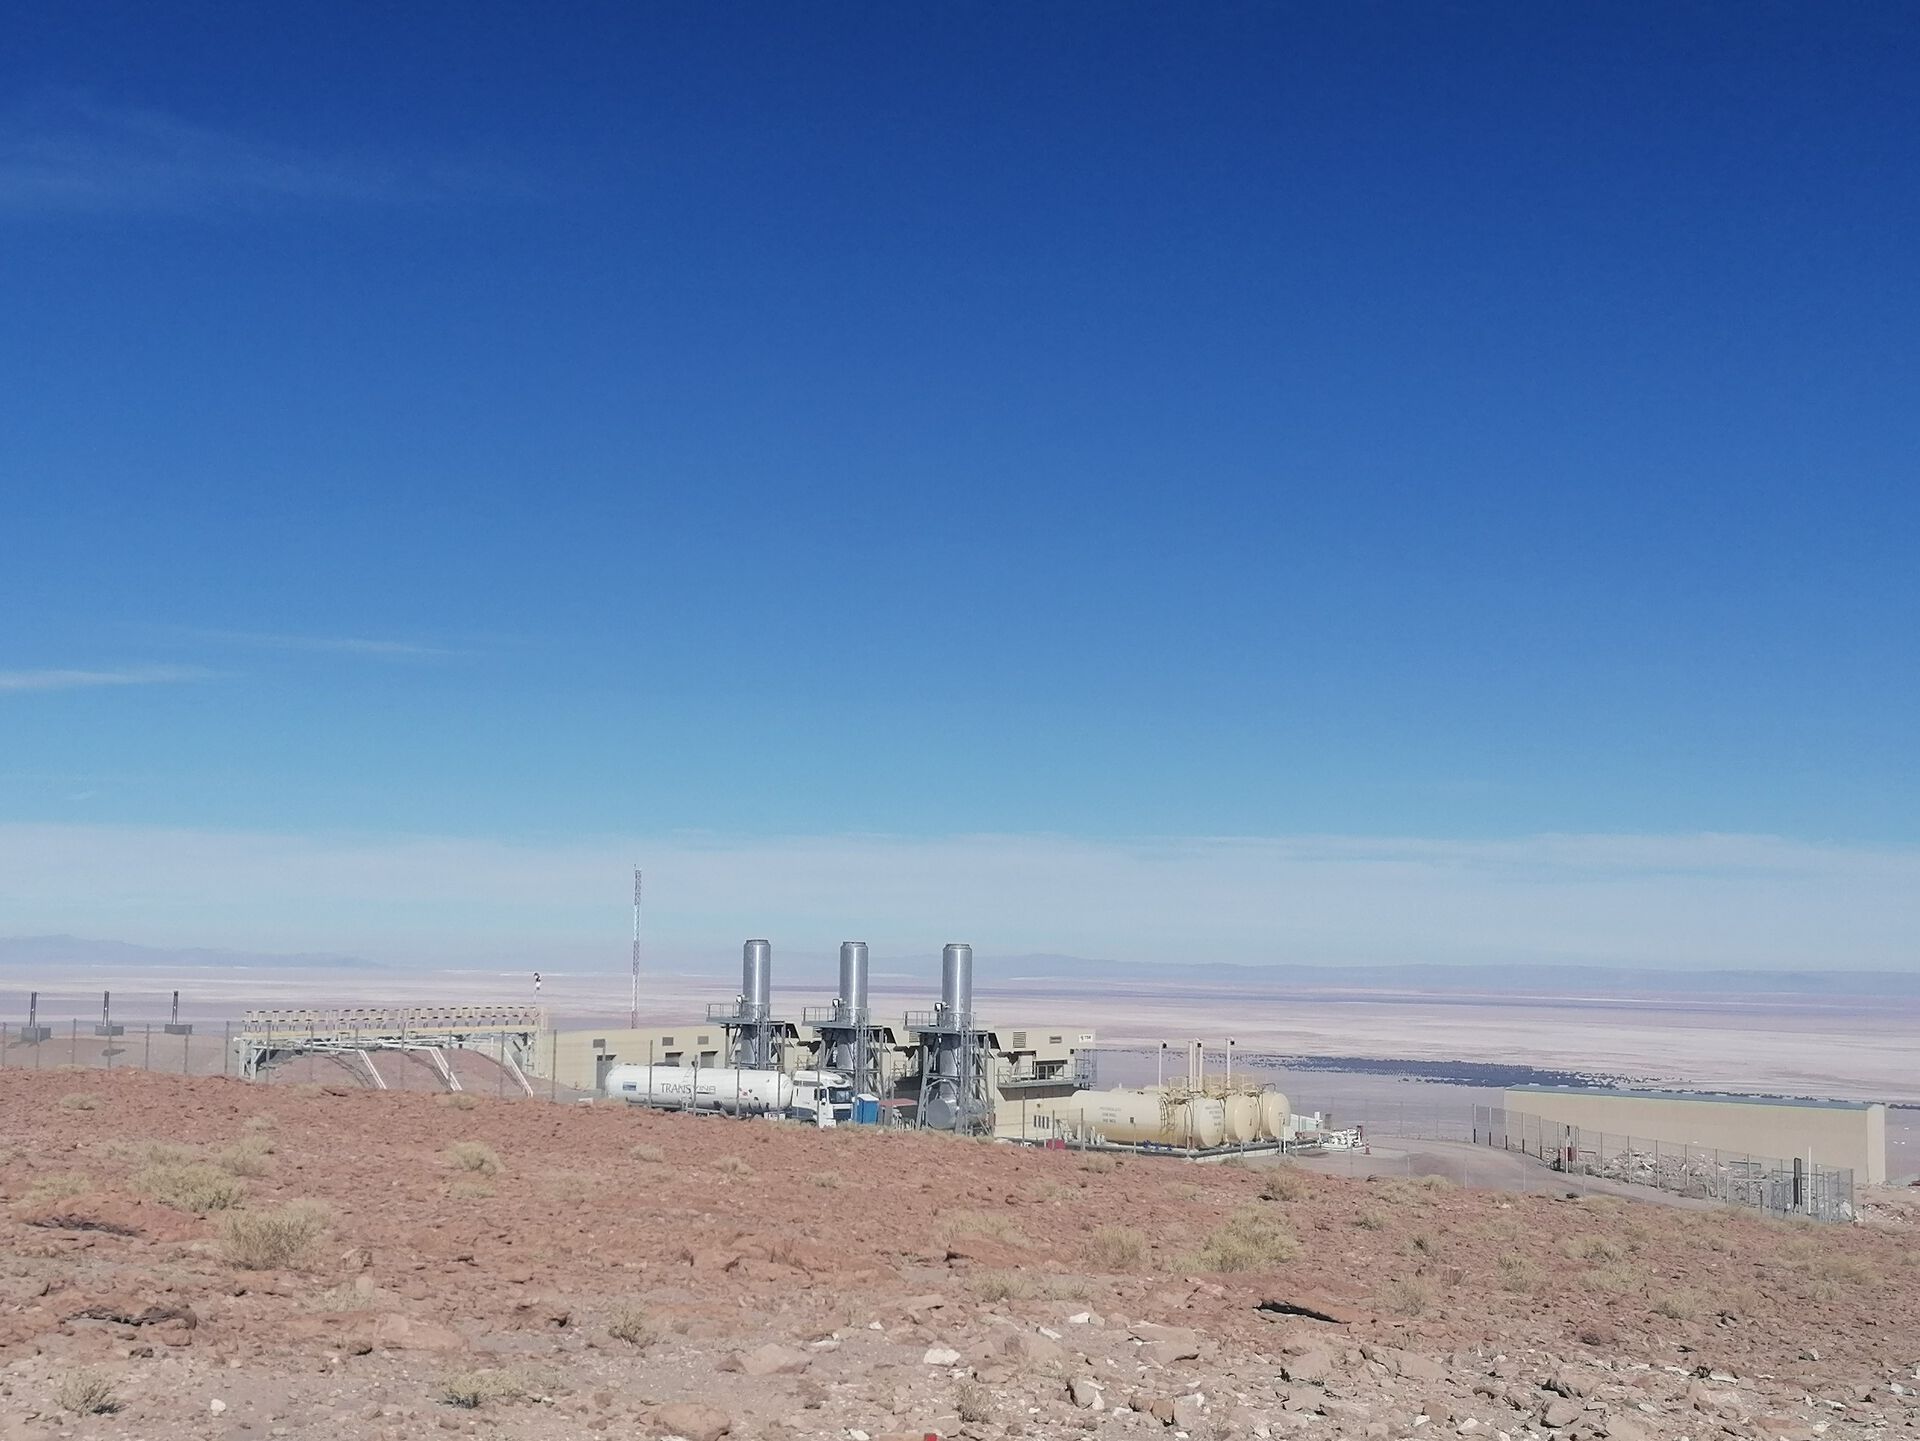 photo of a fossil energy generator in the desert